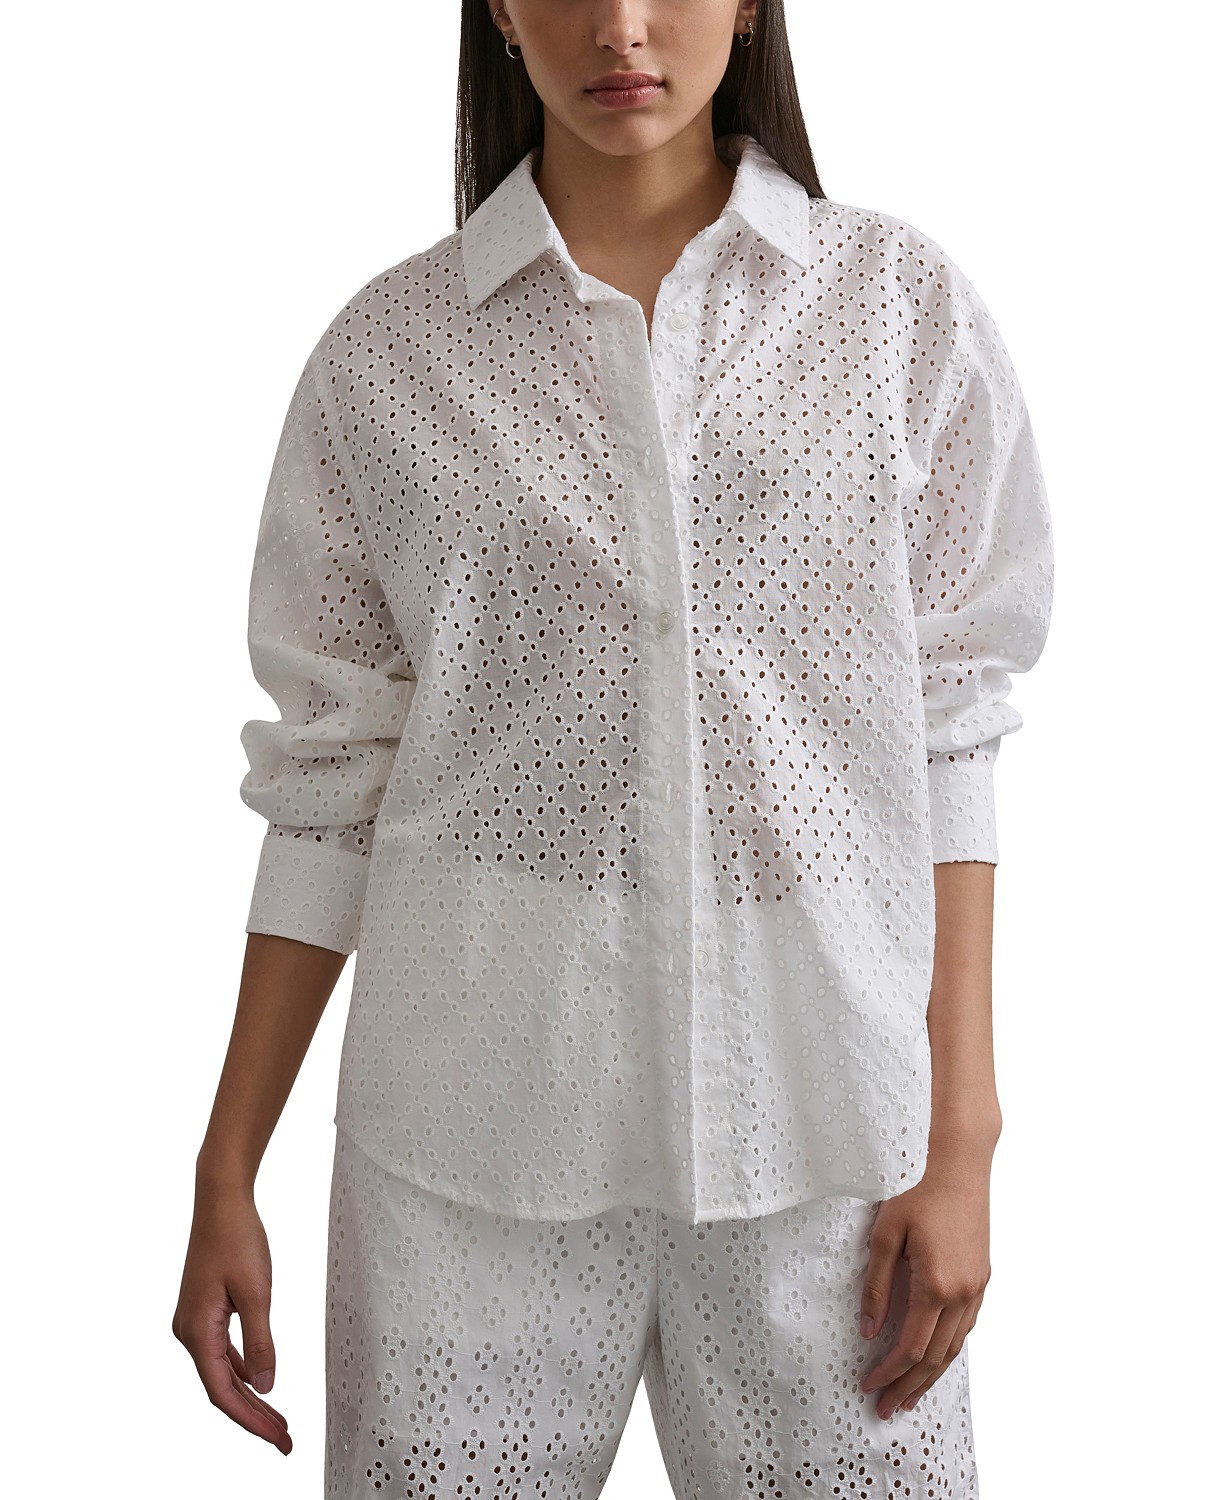 DKNY Womens Eyelet Long-Sleeve Button-Front Blouse